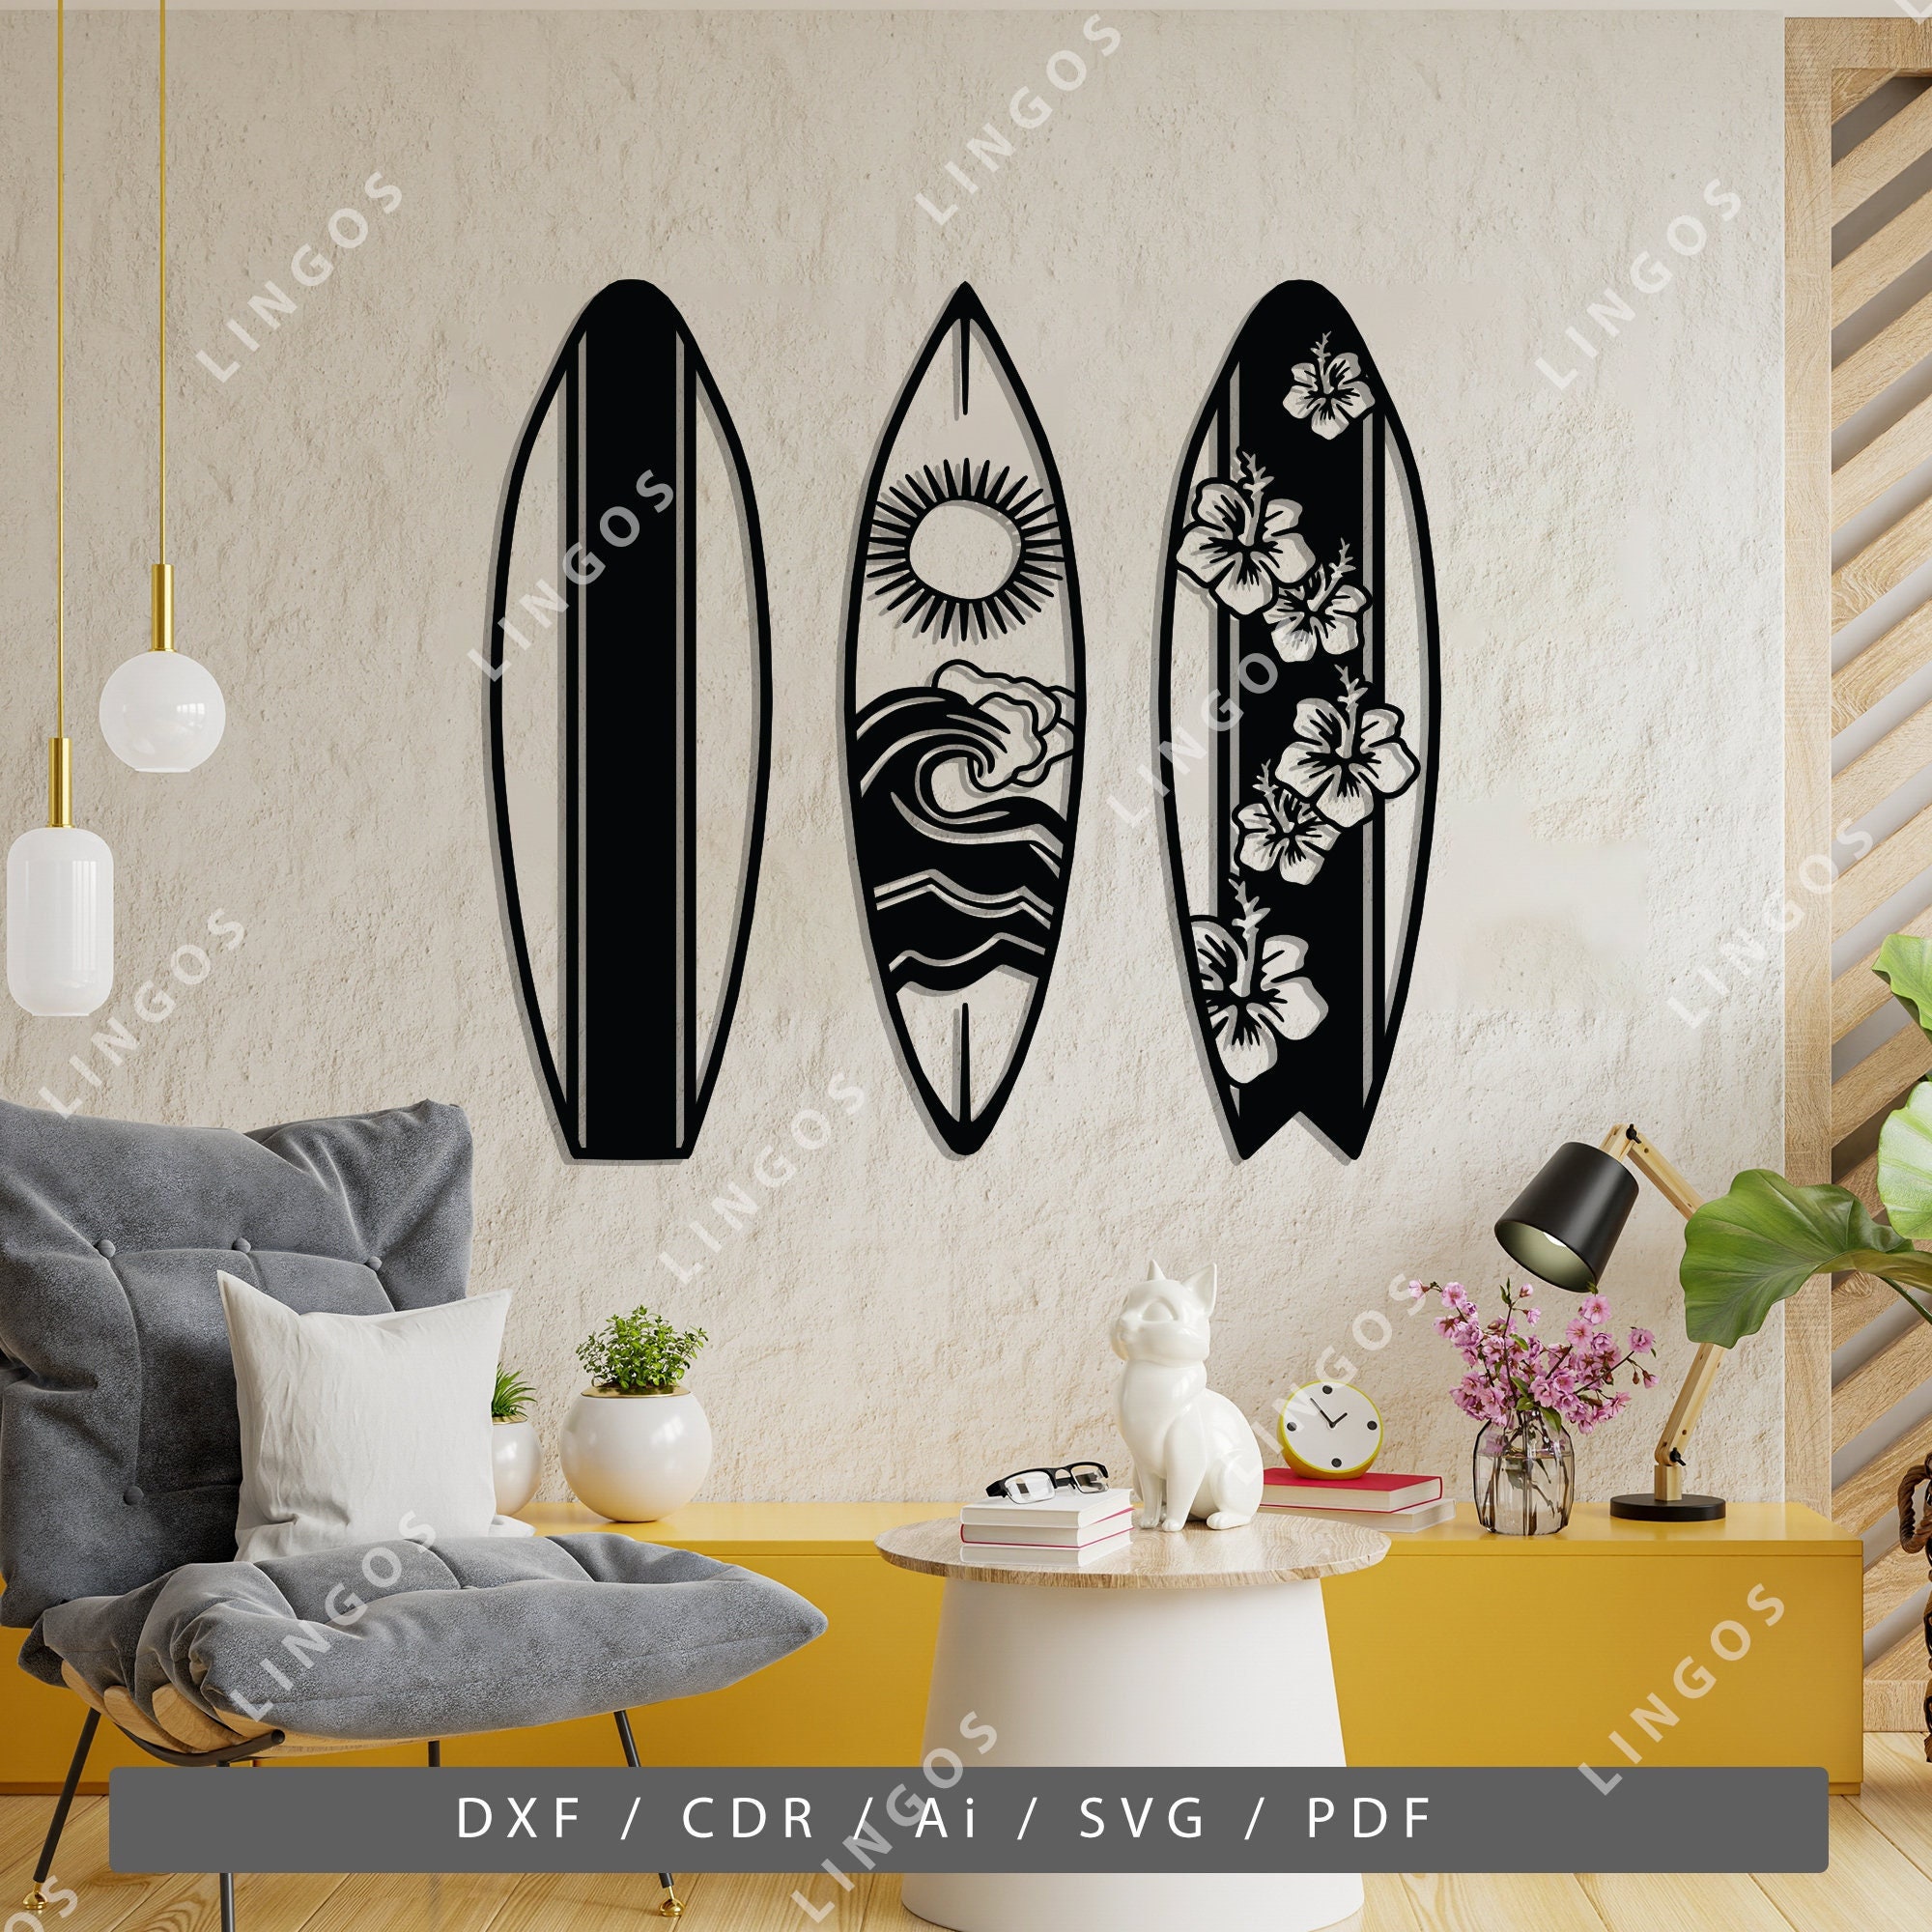 Surfing svg cut file, instant download beach surf clipart, summer surfer  design, surfboard printable vector silhouette - So Fontsy